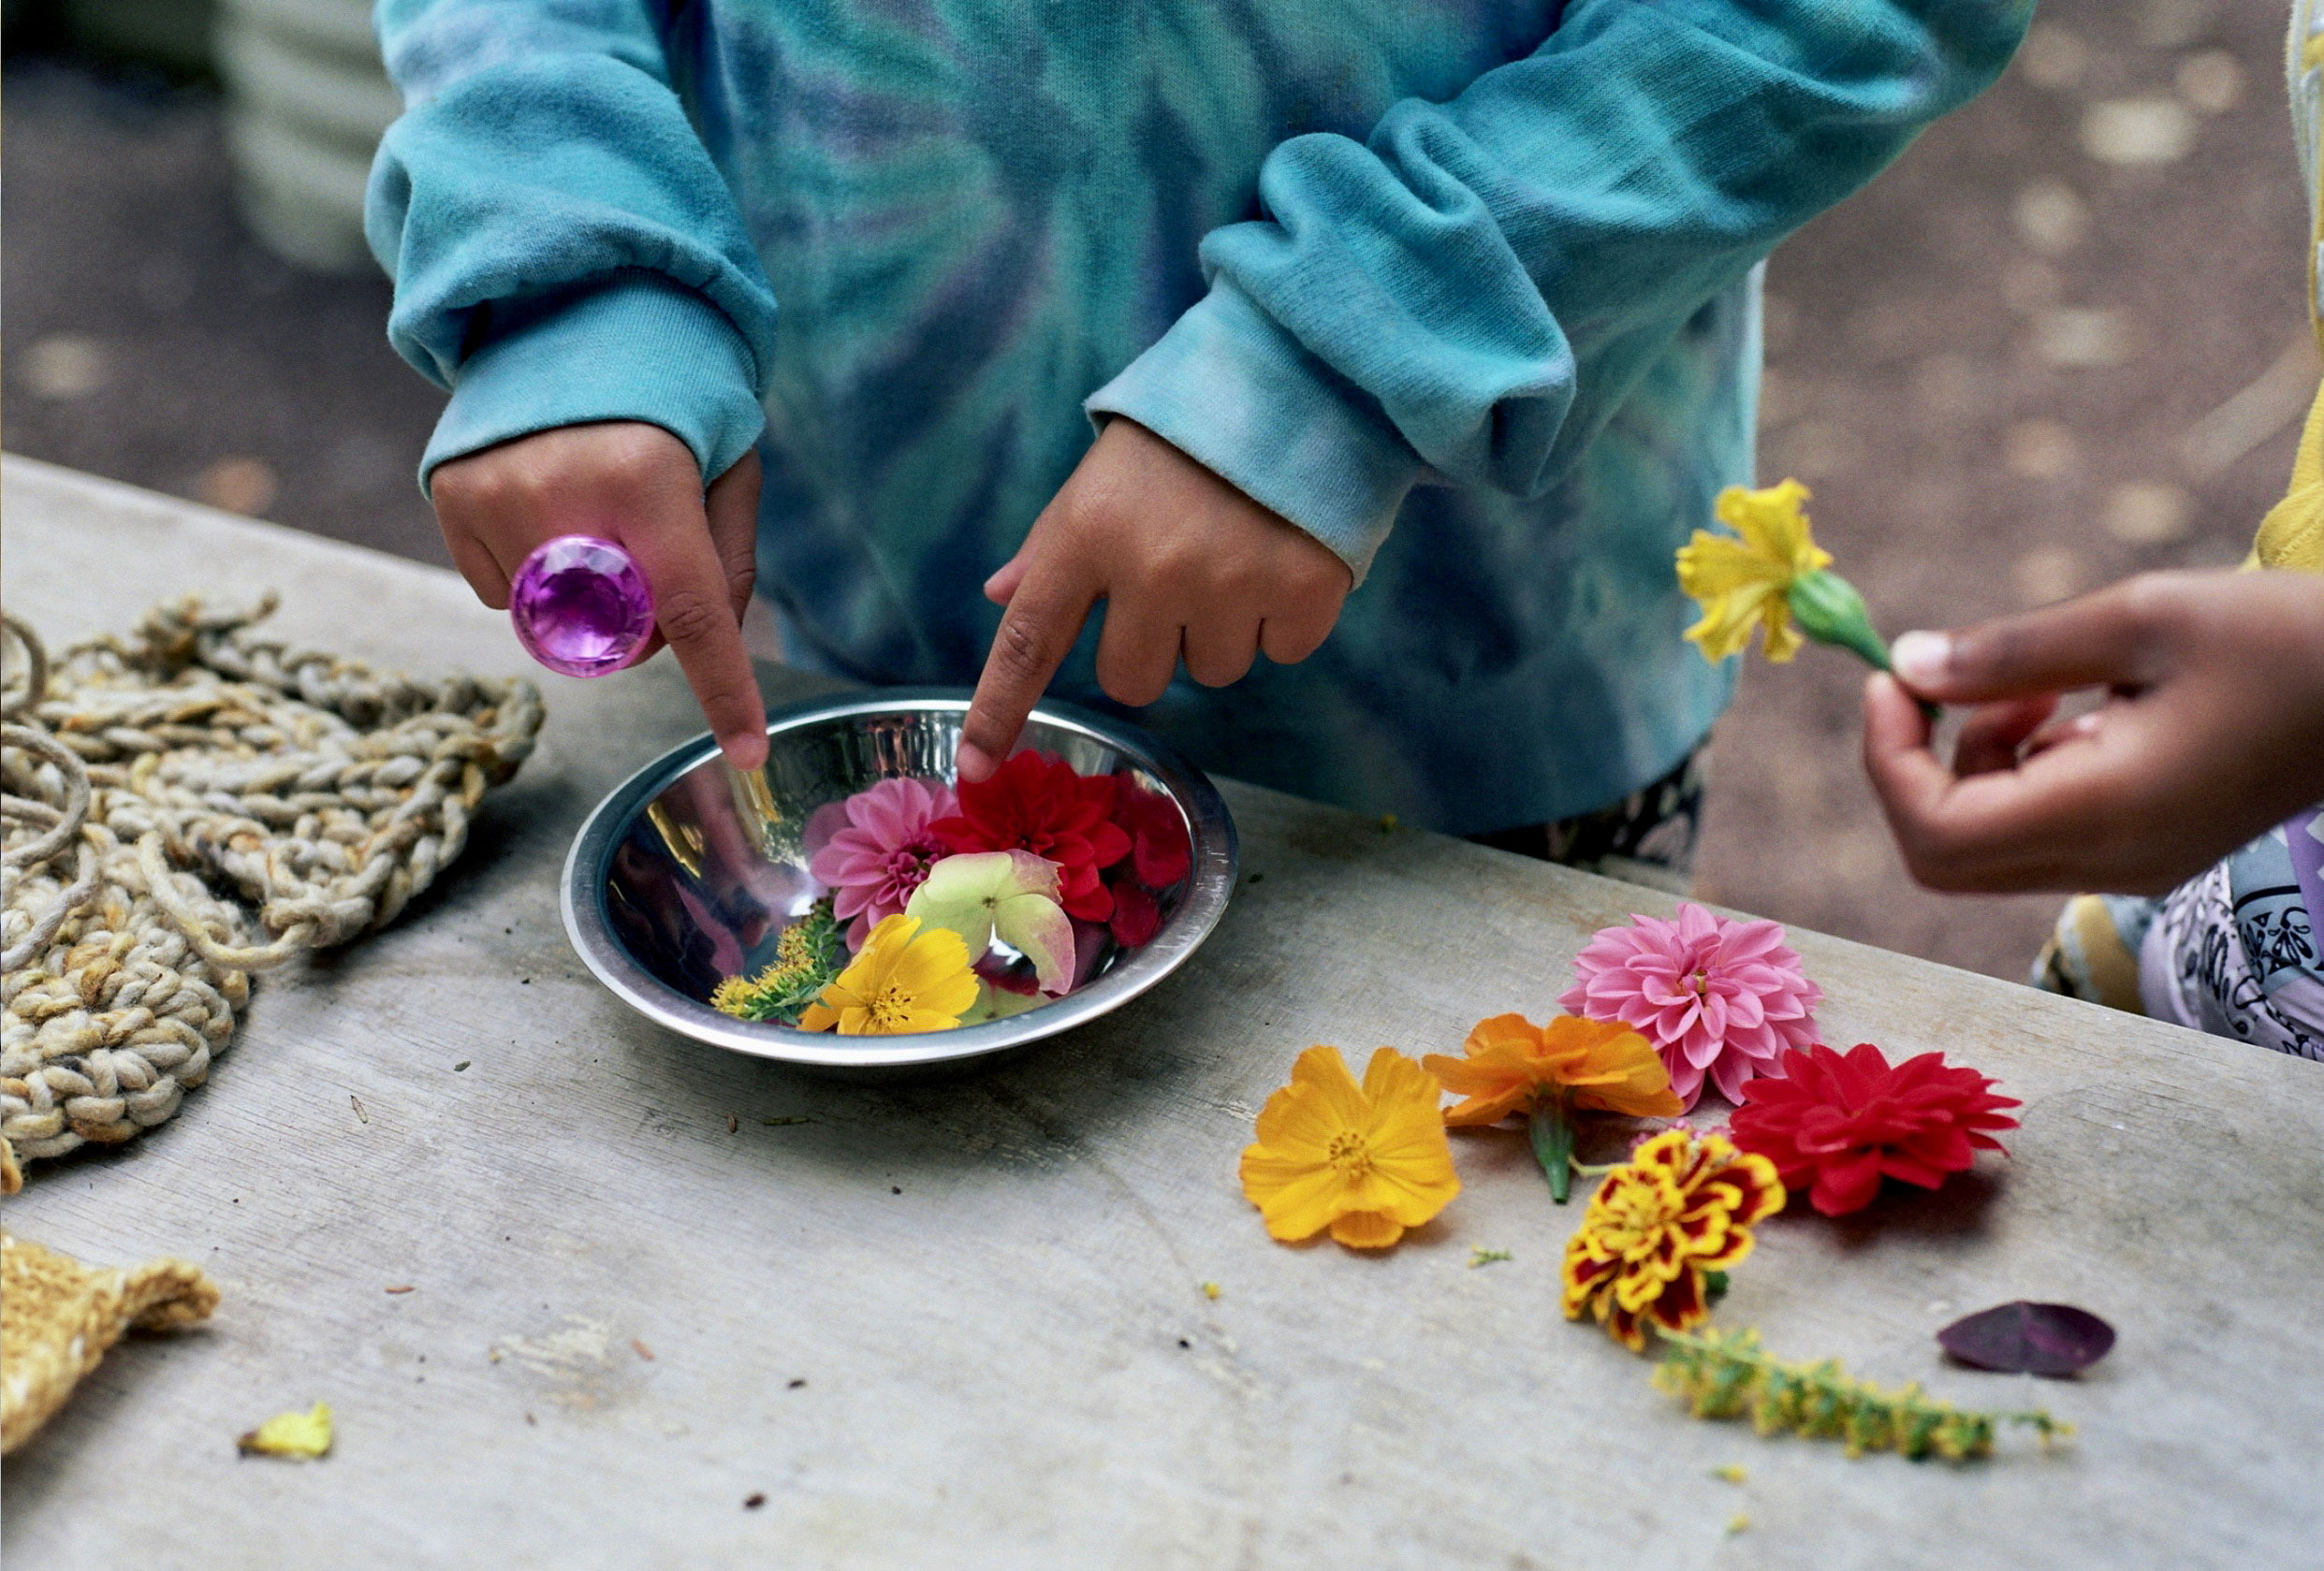 PS270 students experimenting with natural dyes in Pratt’s Textile Dye Garden (photo by Nur Guzeldere)